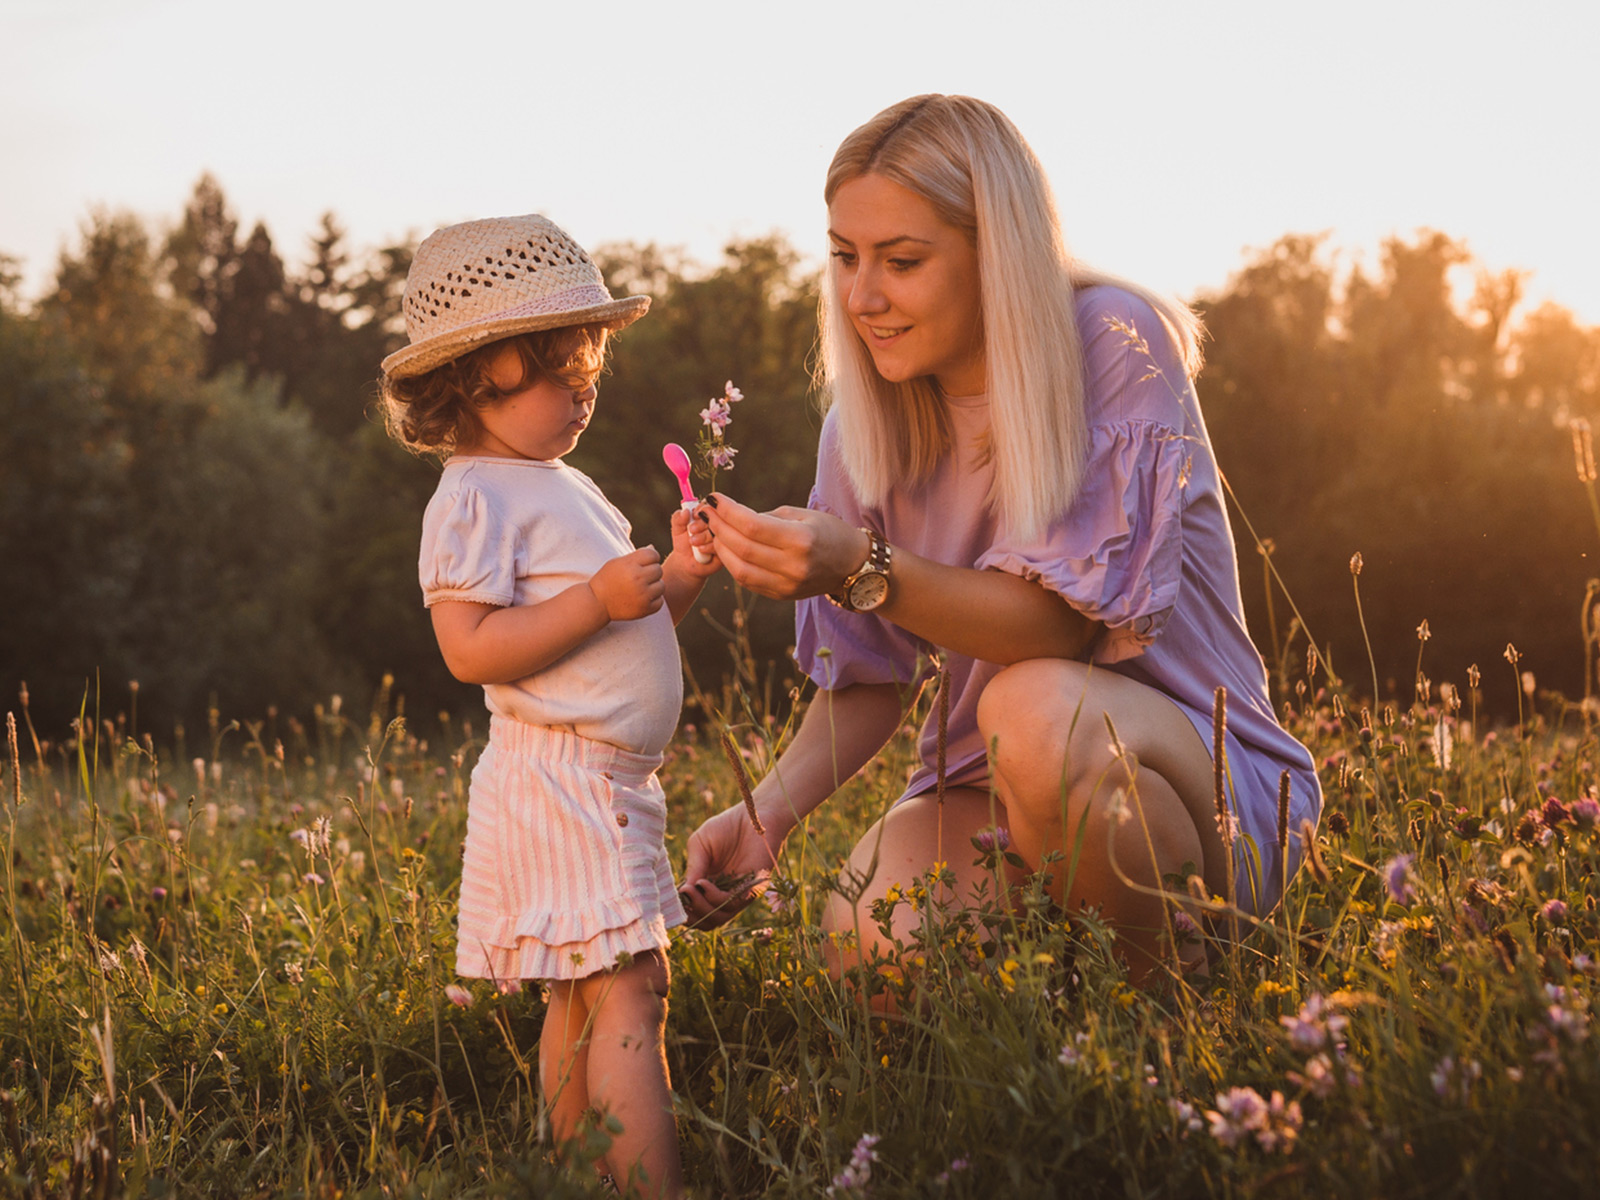 Mom picks wild flowers with young child in a field